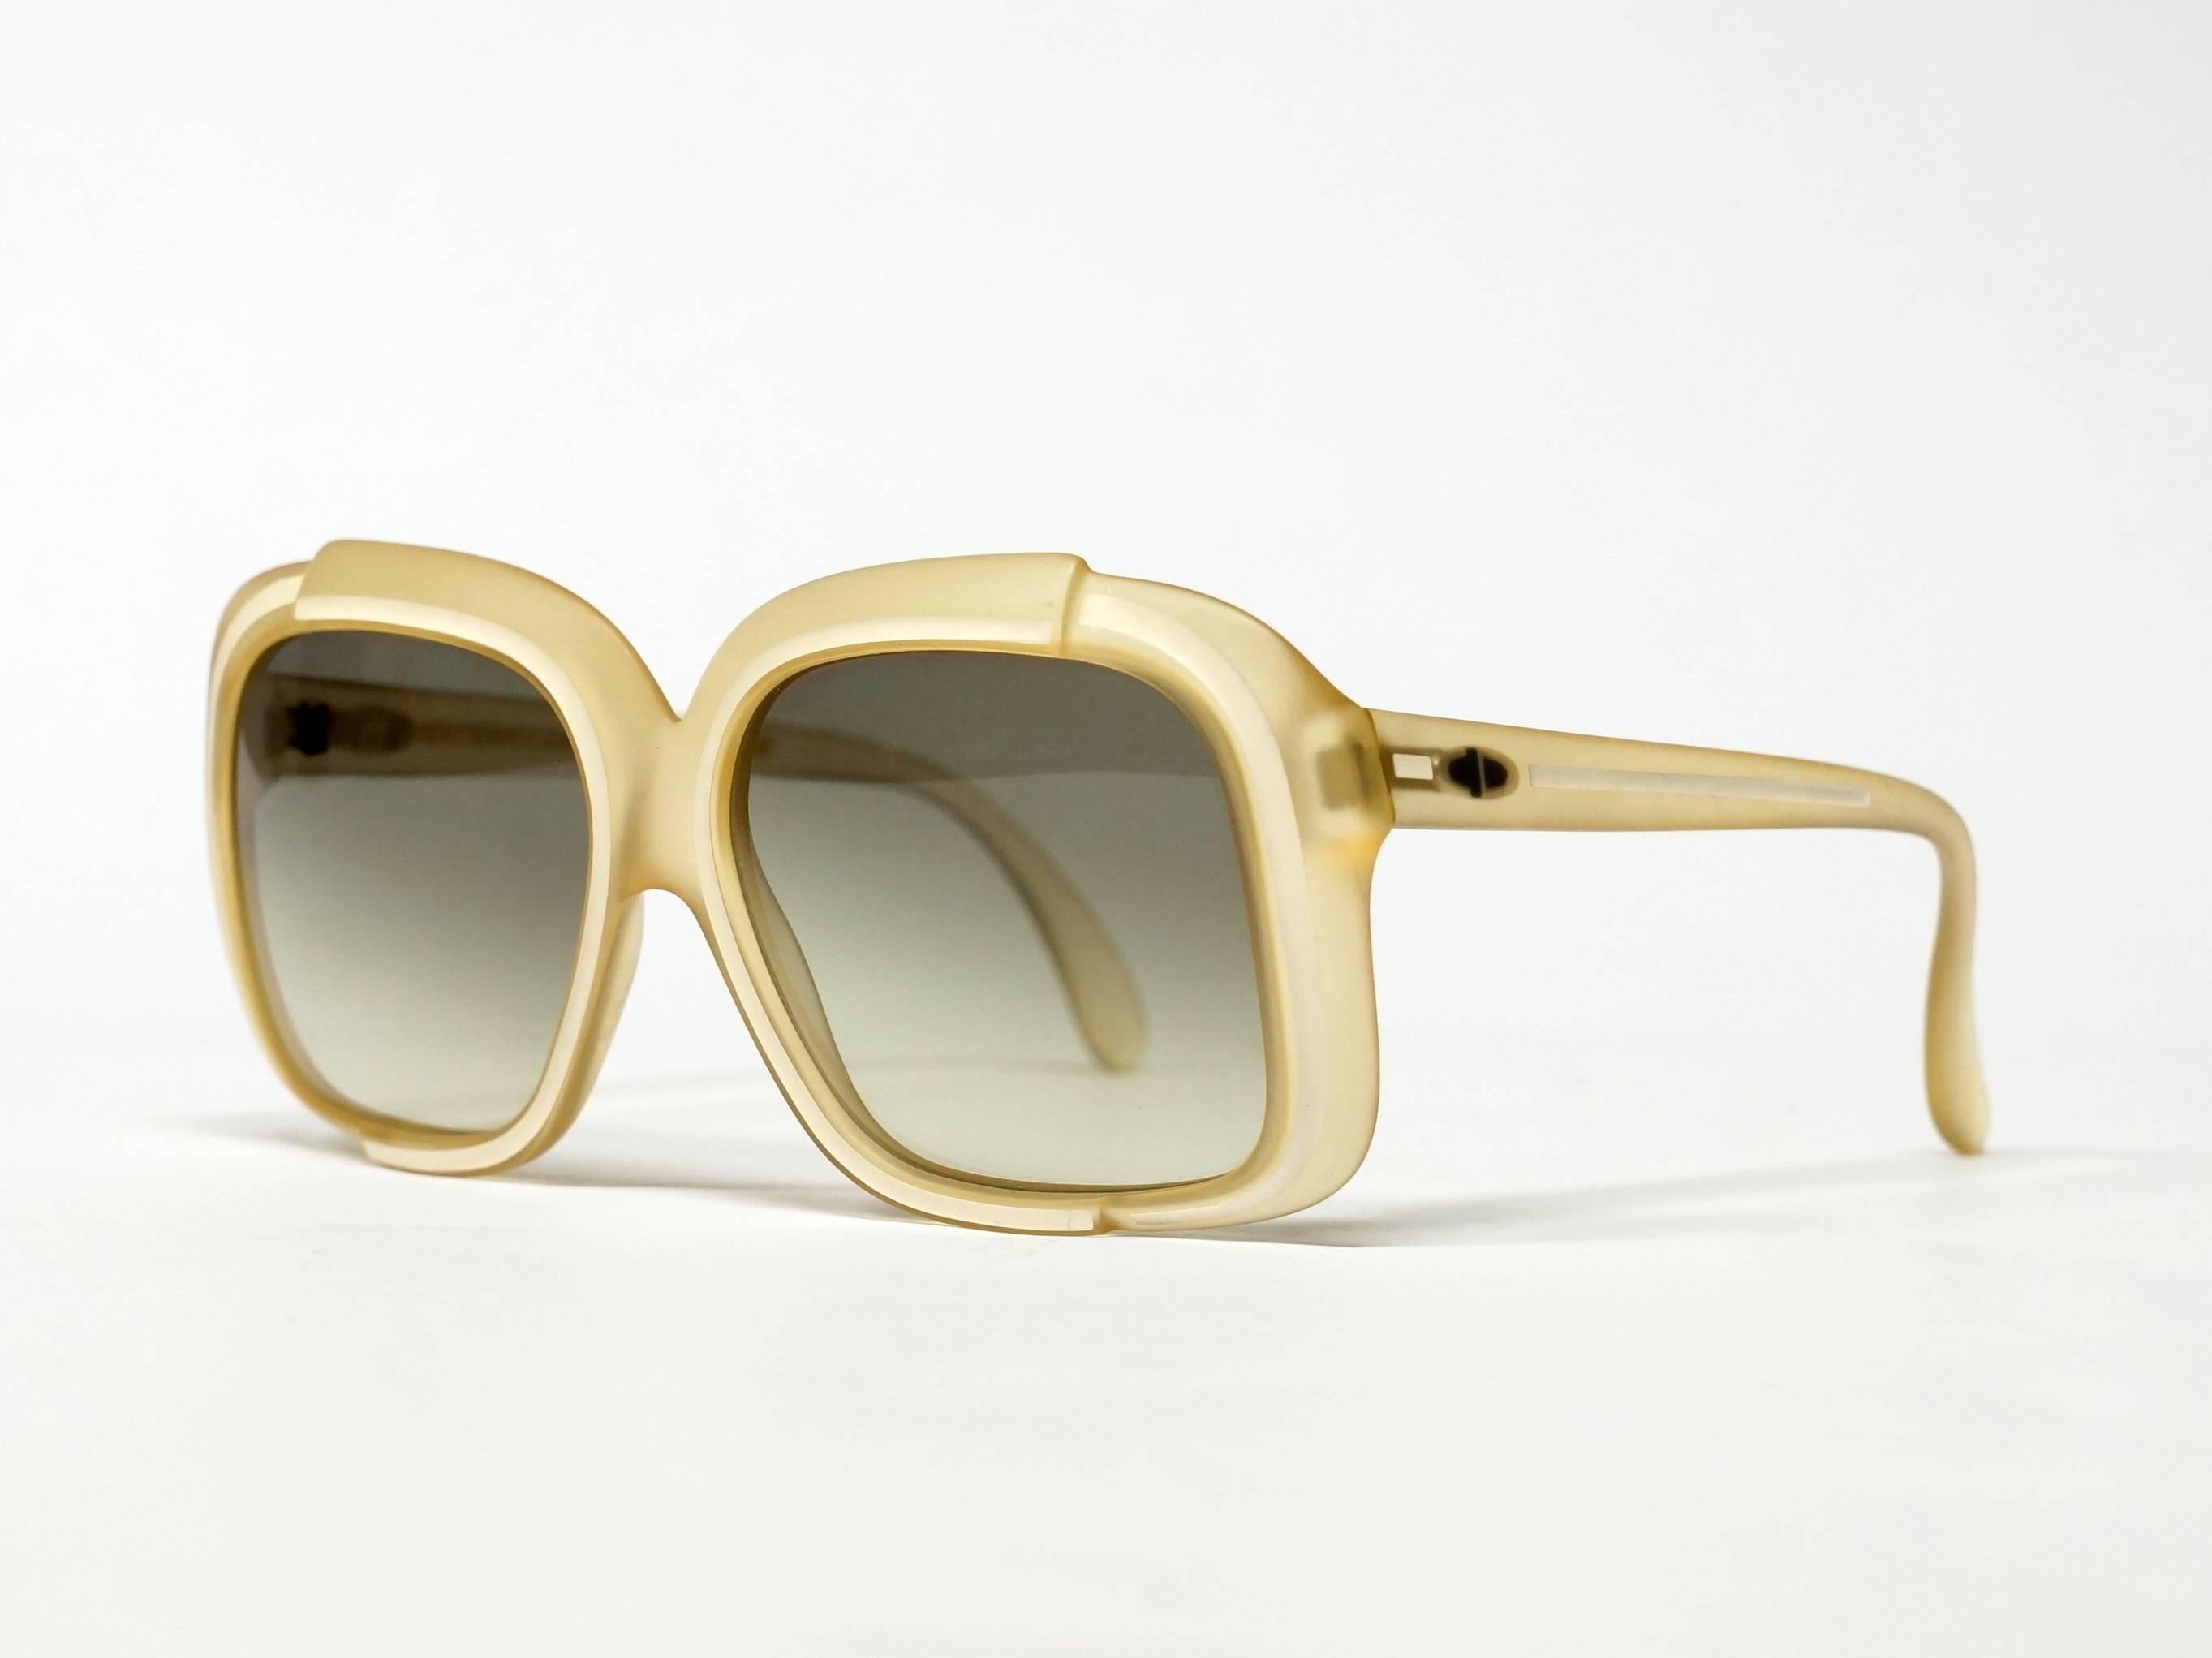 Classy and Eye catching vintage sunglasses by Christian Dior. Translucent honey colored oversized frame with white details. Optyl quality, made in Germany. 

Model: 2042

approximate dimensions:
temple length: 135mm - 5 15/16